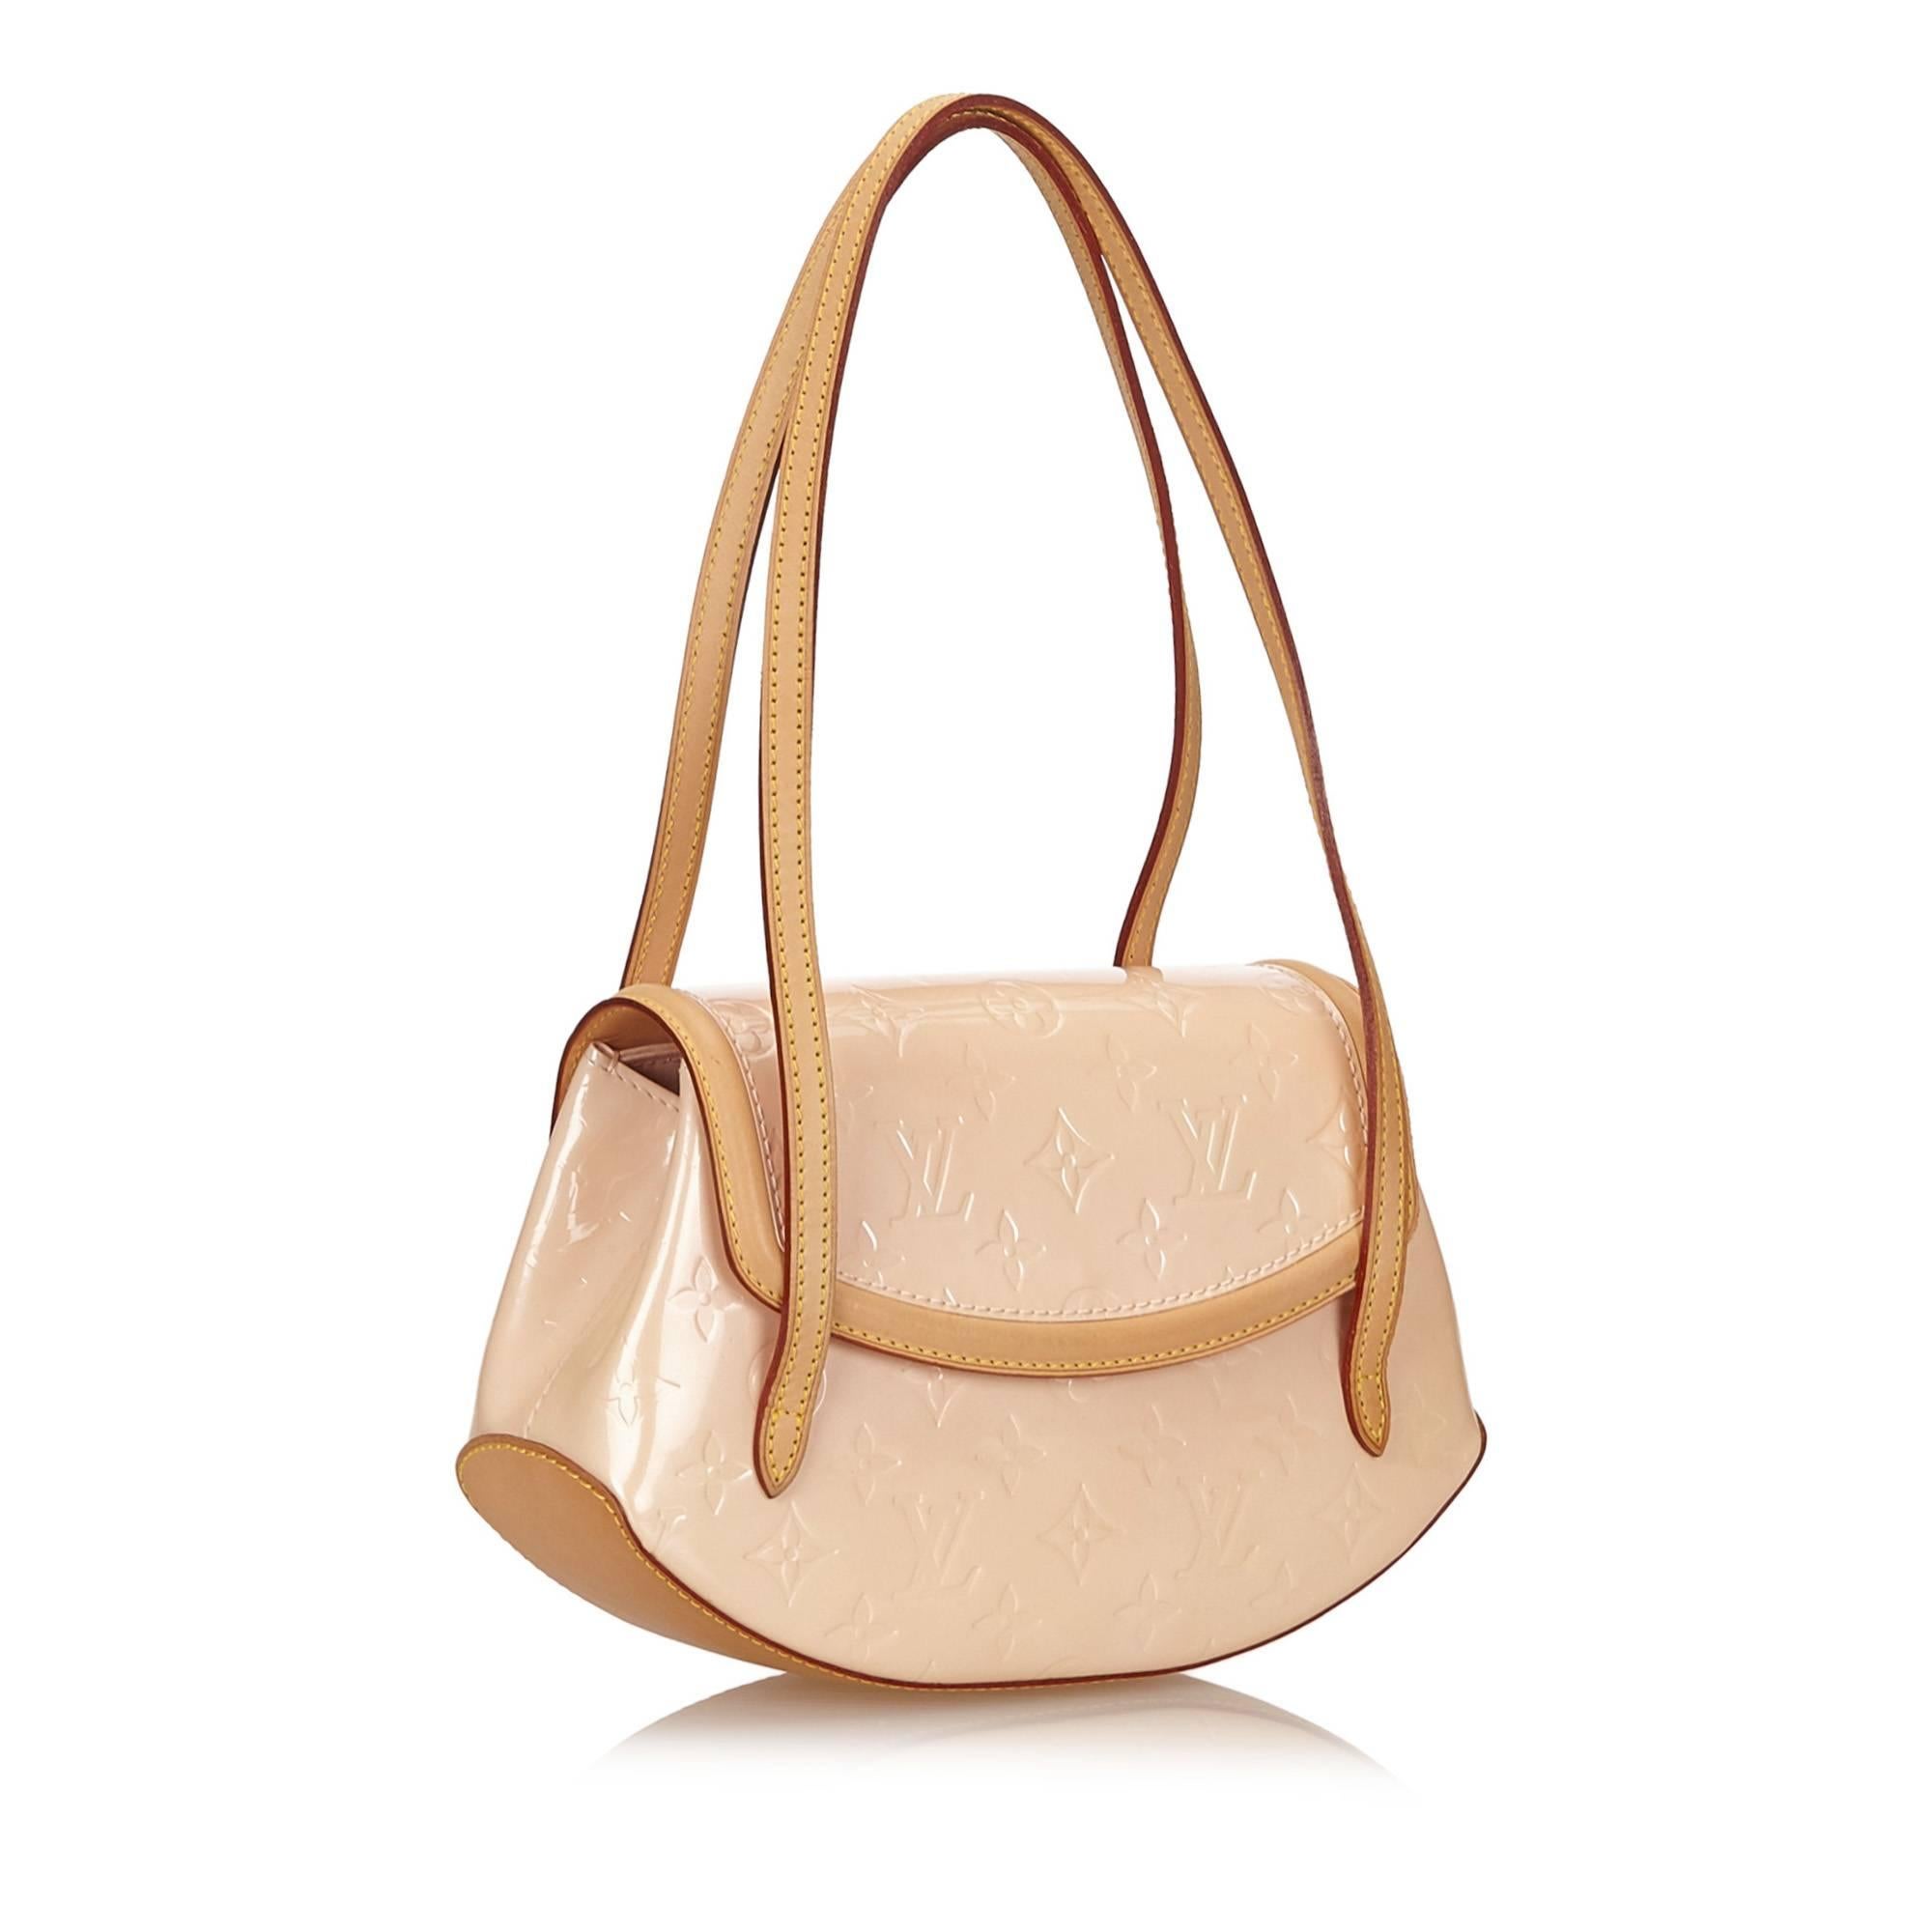 The Biscayne Bay features Vernis leather, flat vachetta straps and trim, a front flap, and an interior pocket. 

It carries a B condition rating.

Dimensions: 
Length 25 cm
Width 17 cm
Depth 7 cm
Shoulder Drop 21 cm

Inclusions: Dust Bag, Box

Louis